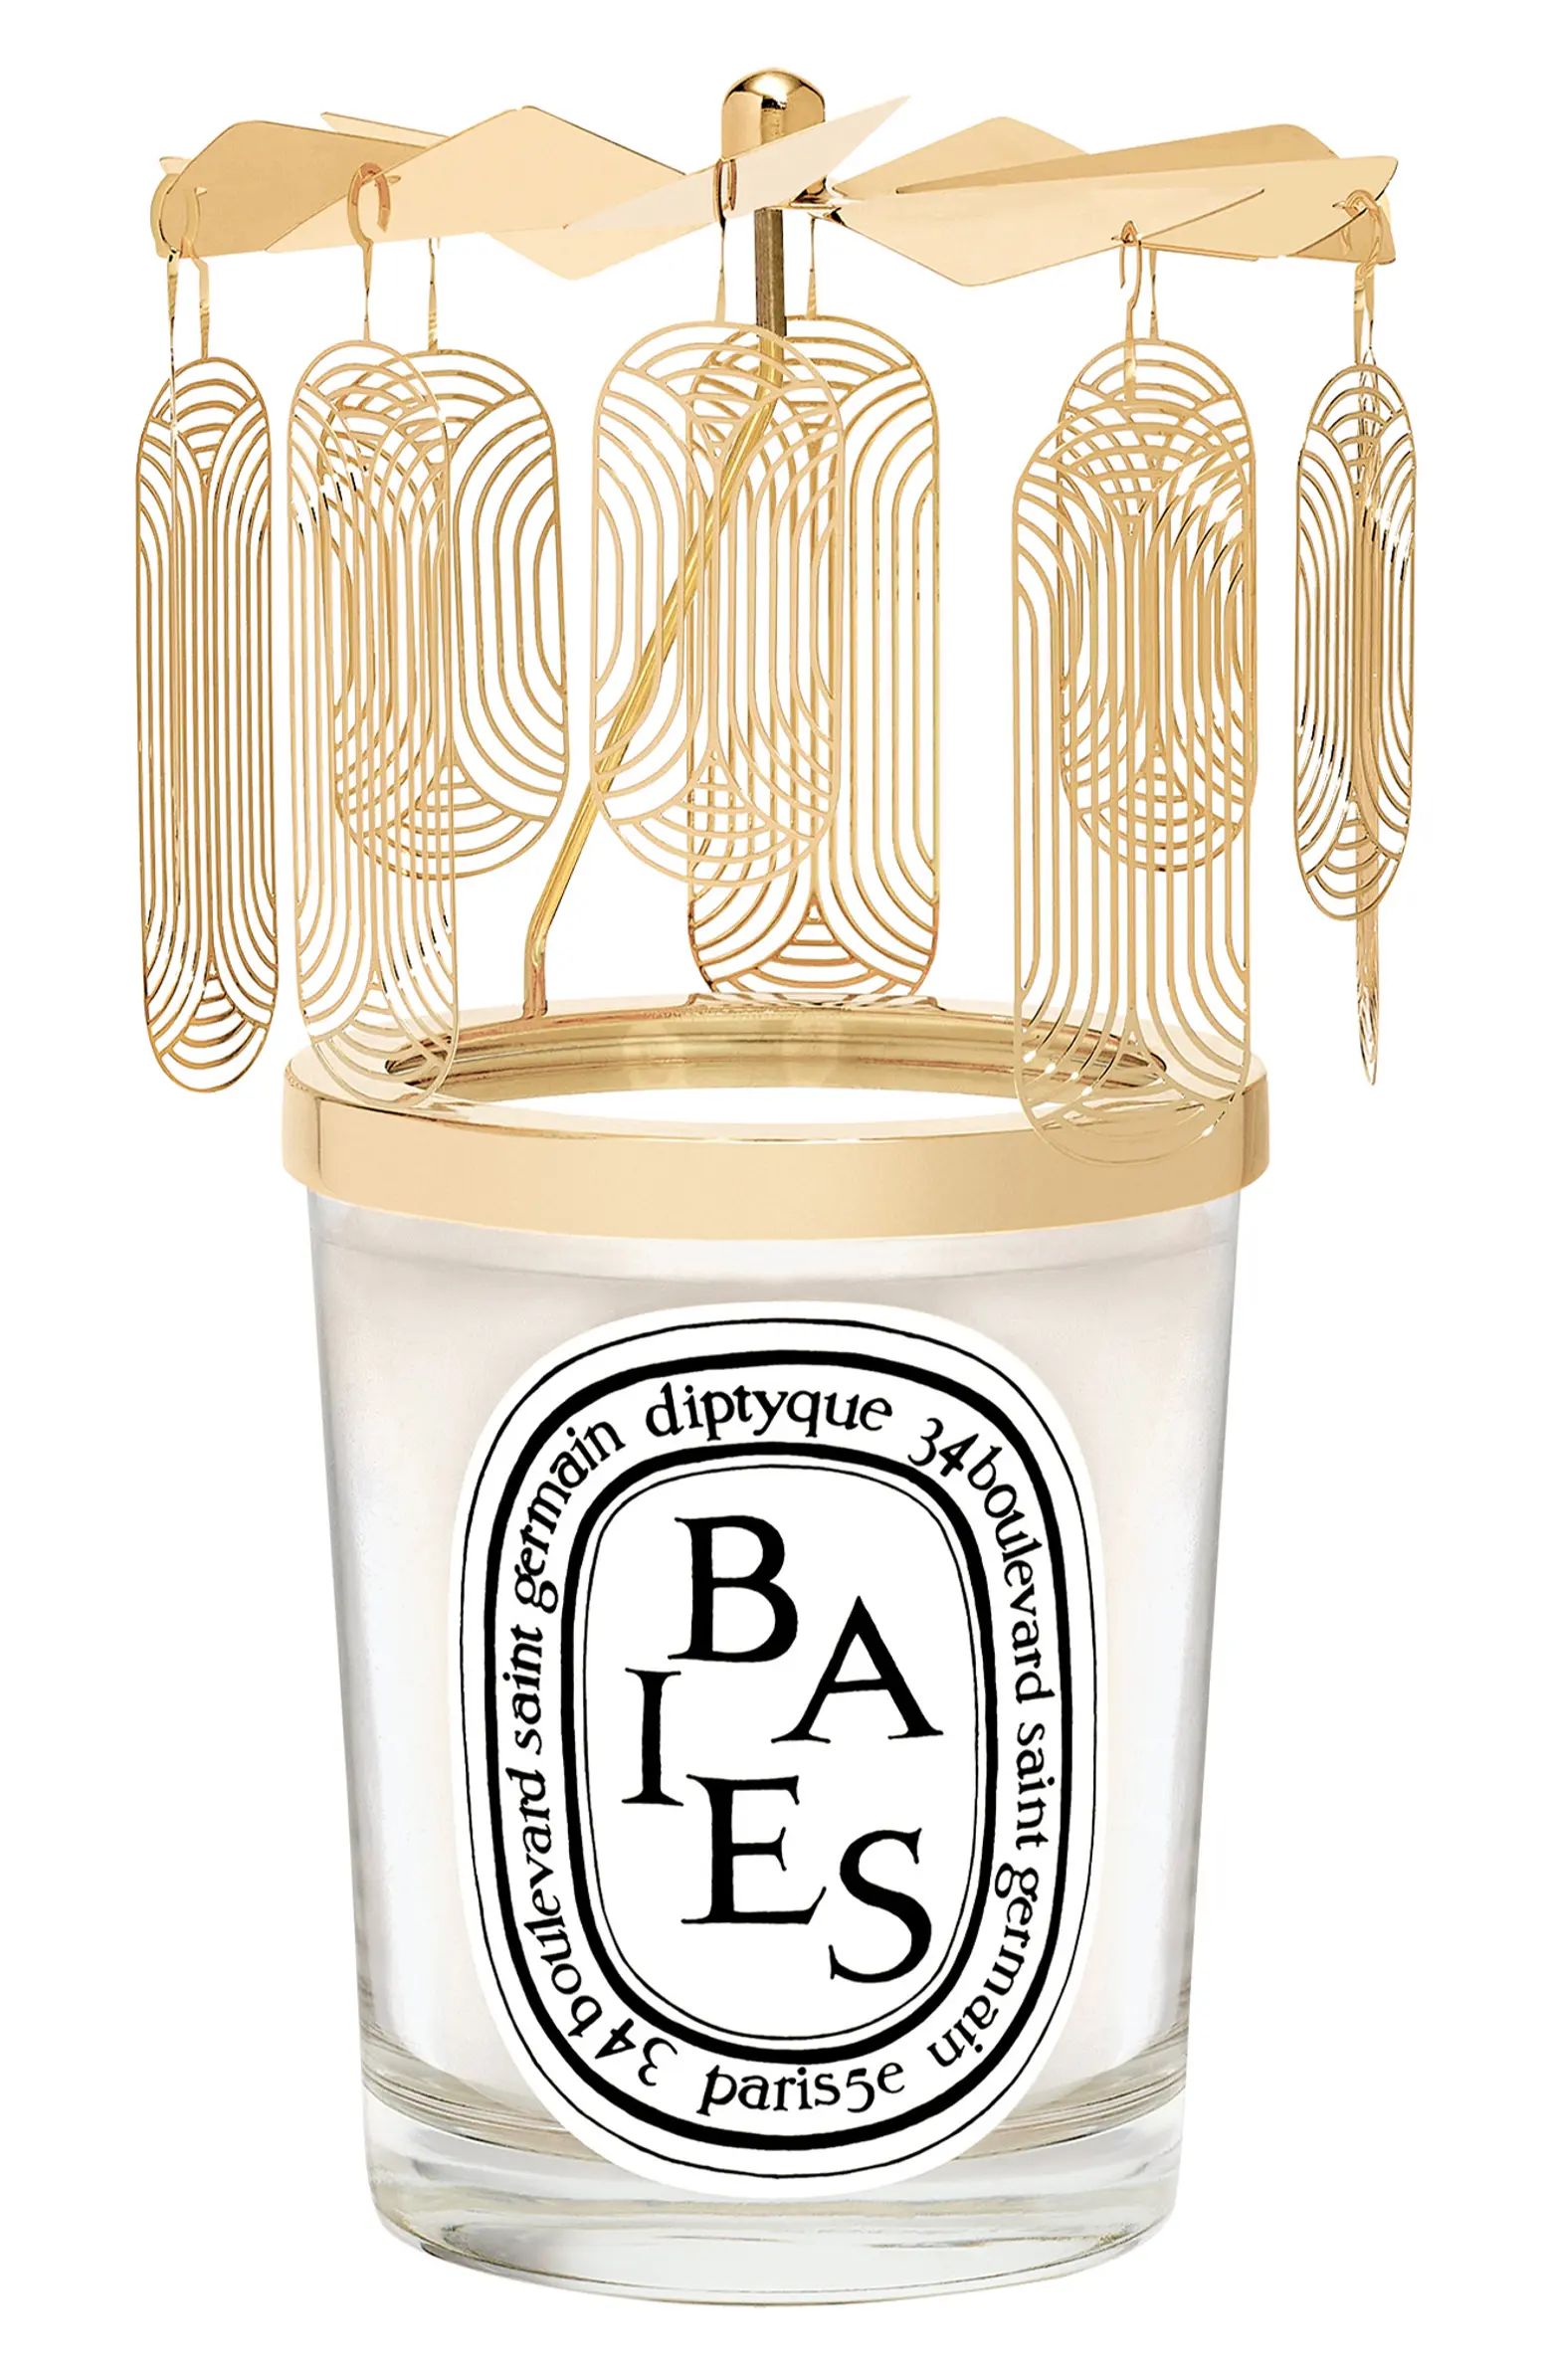 Diptyque Baies (Berries) Scented Candle & Carousel Gift Set | Nordstrom | Nordstrom